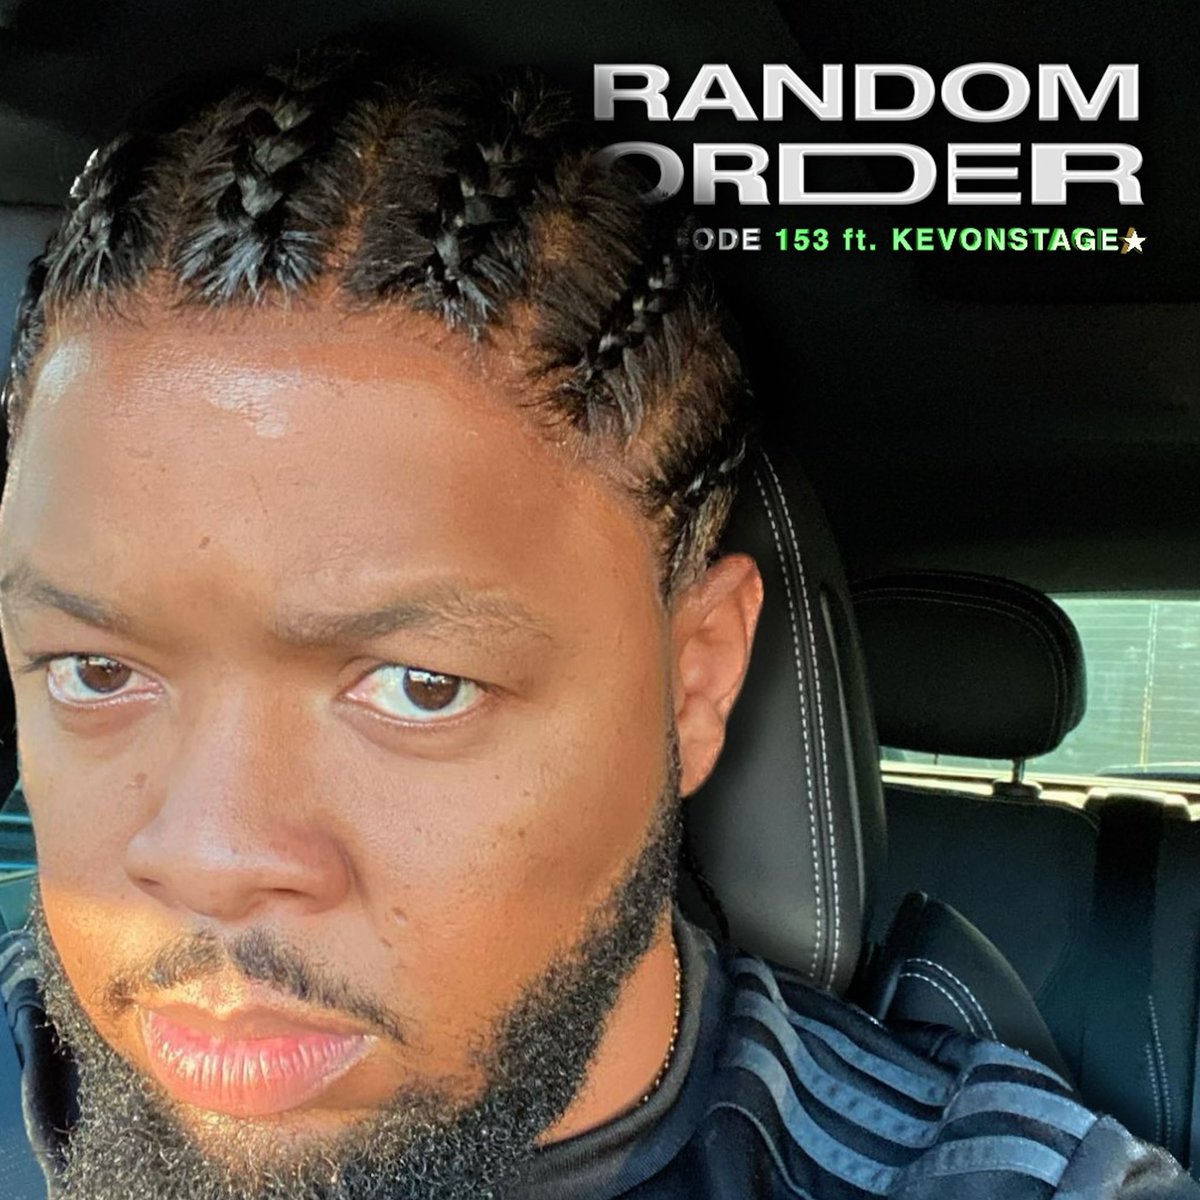 “From Bald to Braids in 30 Minutes” EPISODE 153 ft. @KevOnStage [Audio is out now!] Listen here: tinyurl.com/2rbtpwse